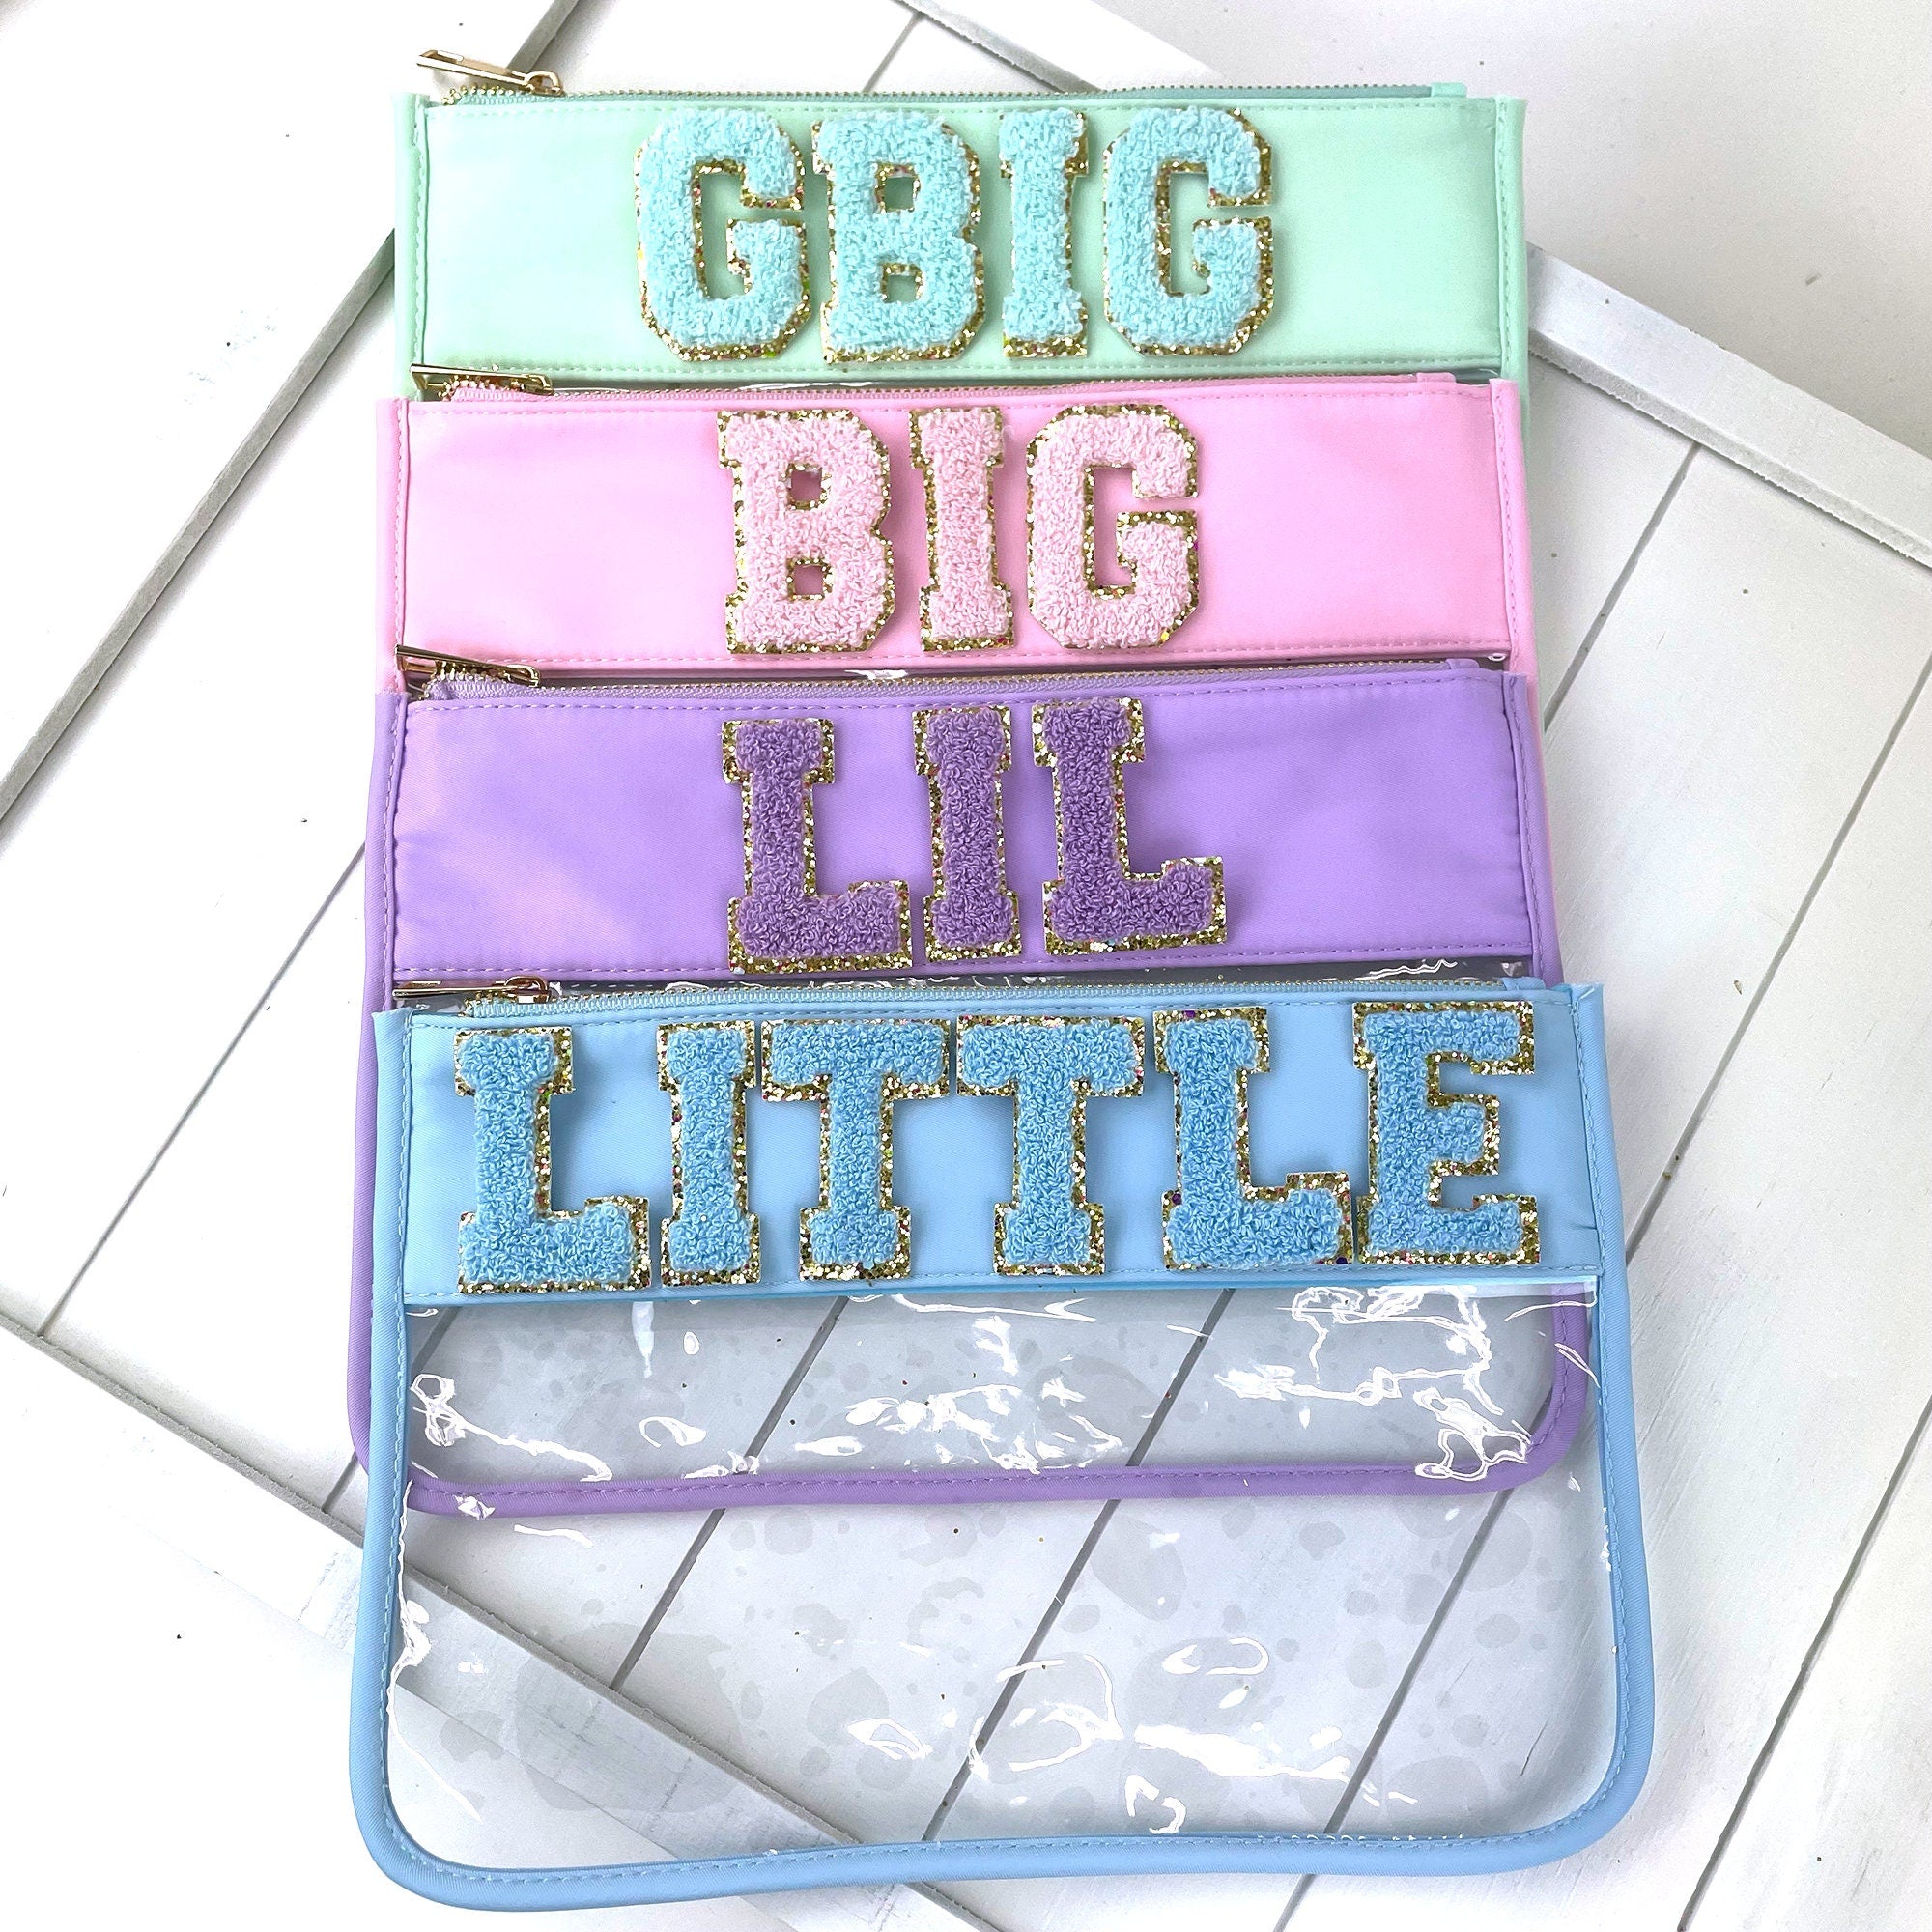 Big Little Sorority Clear Bag, Chenille Adhesive Patches, Zipper Travel Bag - Go Greek Chic